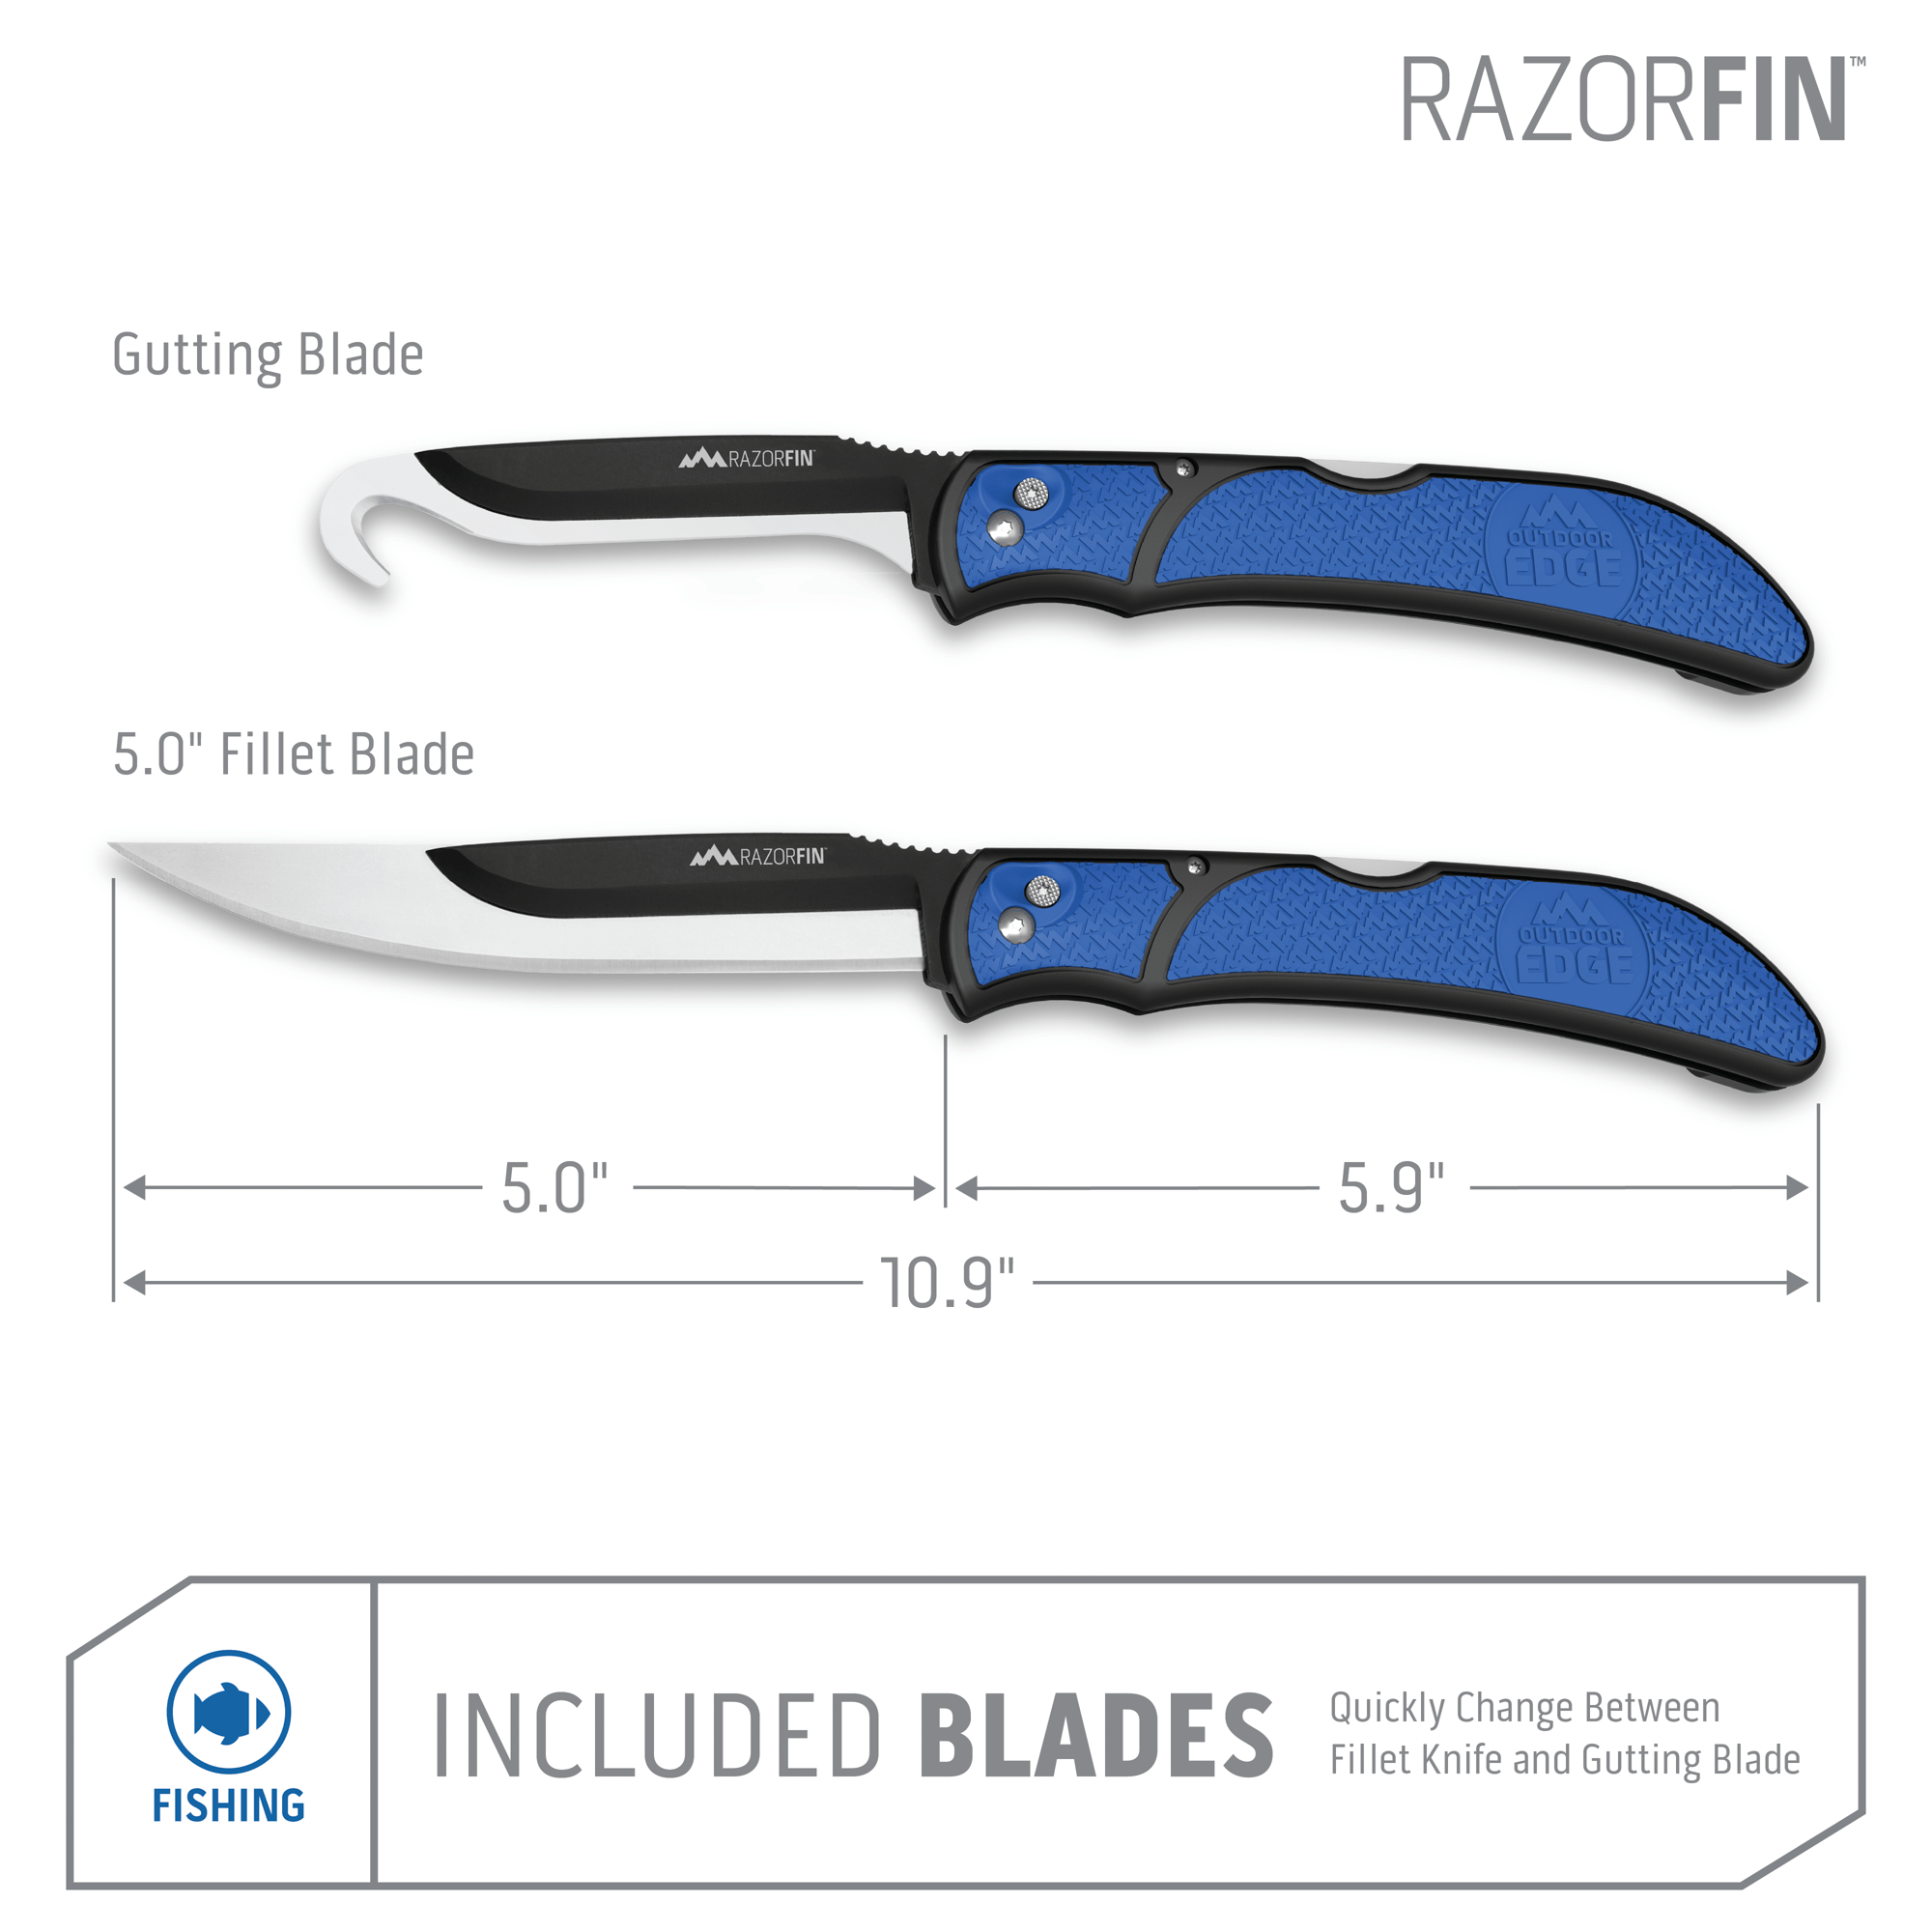 Outdoor Edge RazorFin Filet Knife Product Photo showing gutting blade and fillet blade